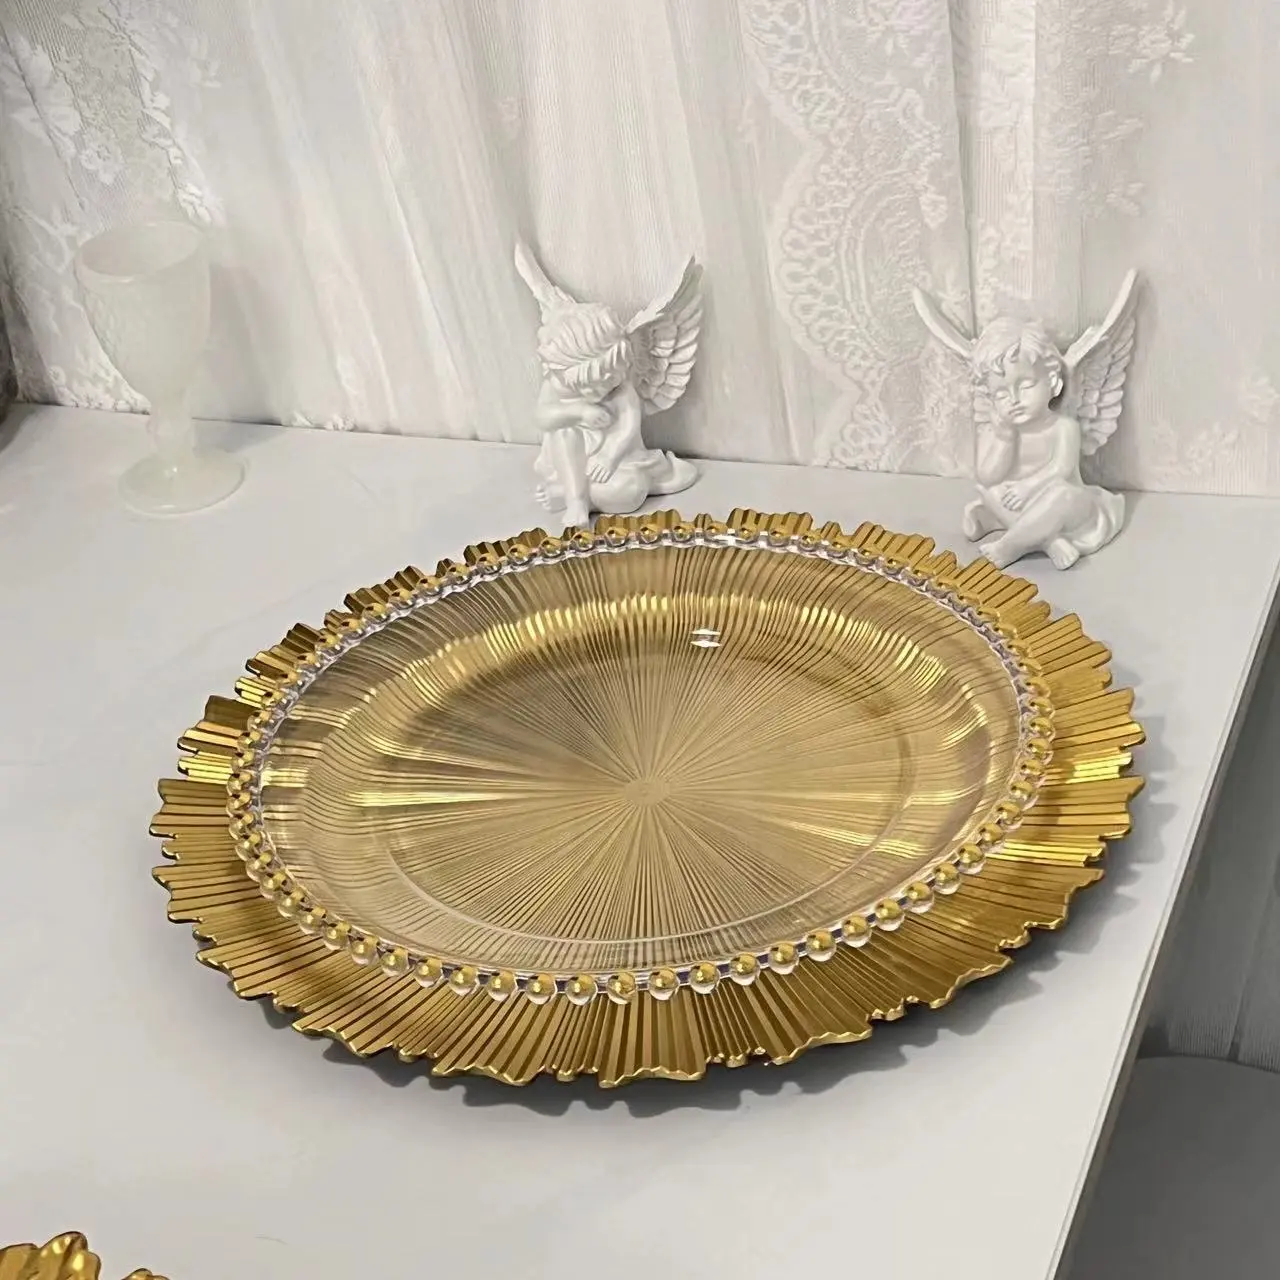 13 Inch Round Gold Plastic Charger Plates Wholesale for Wedding Banquet Party Events